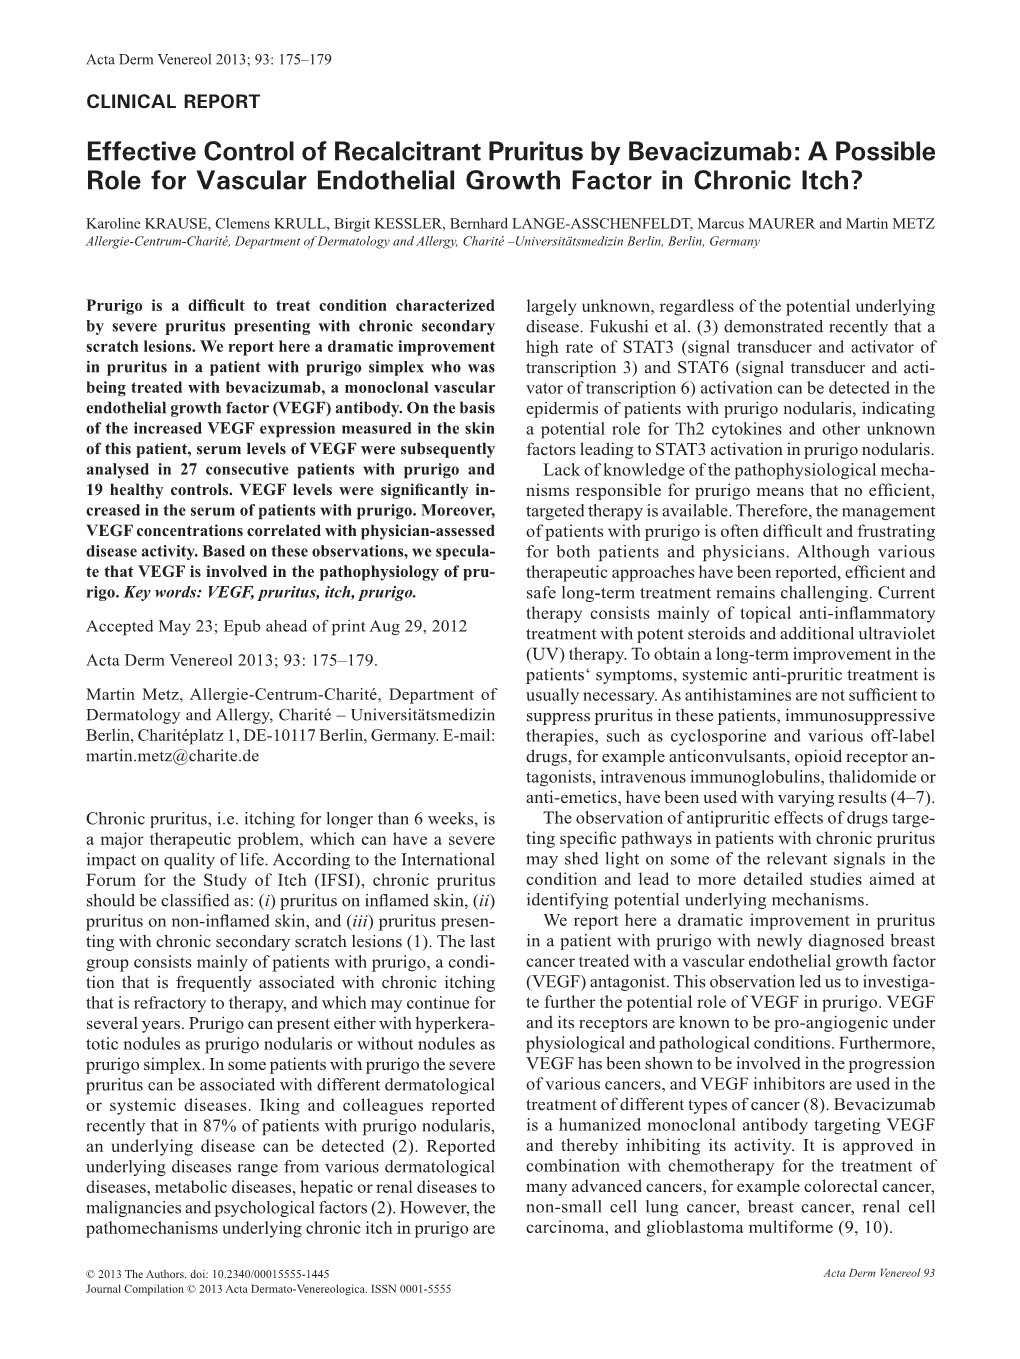 A Possible Role for Vascular Endothelial Growth Factor in Chronic Itch?